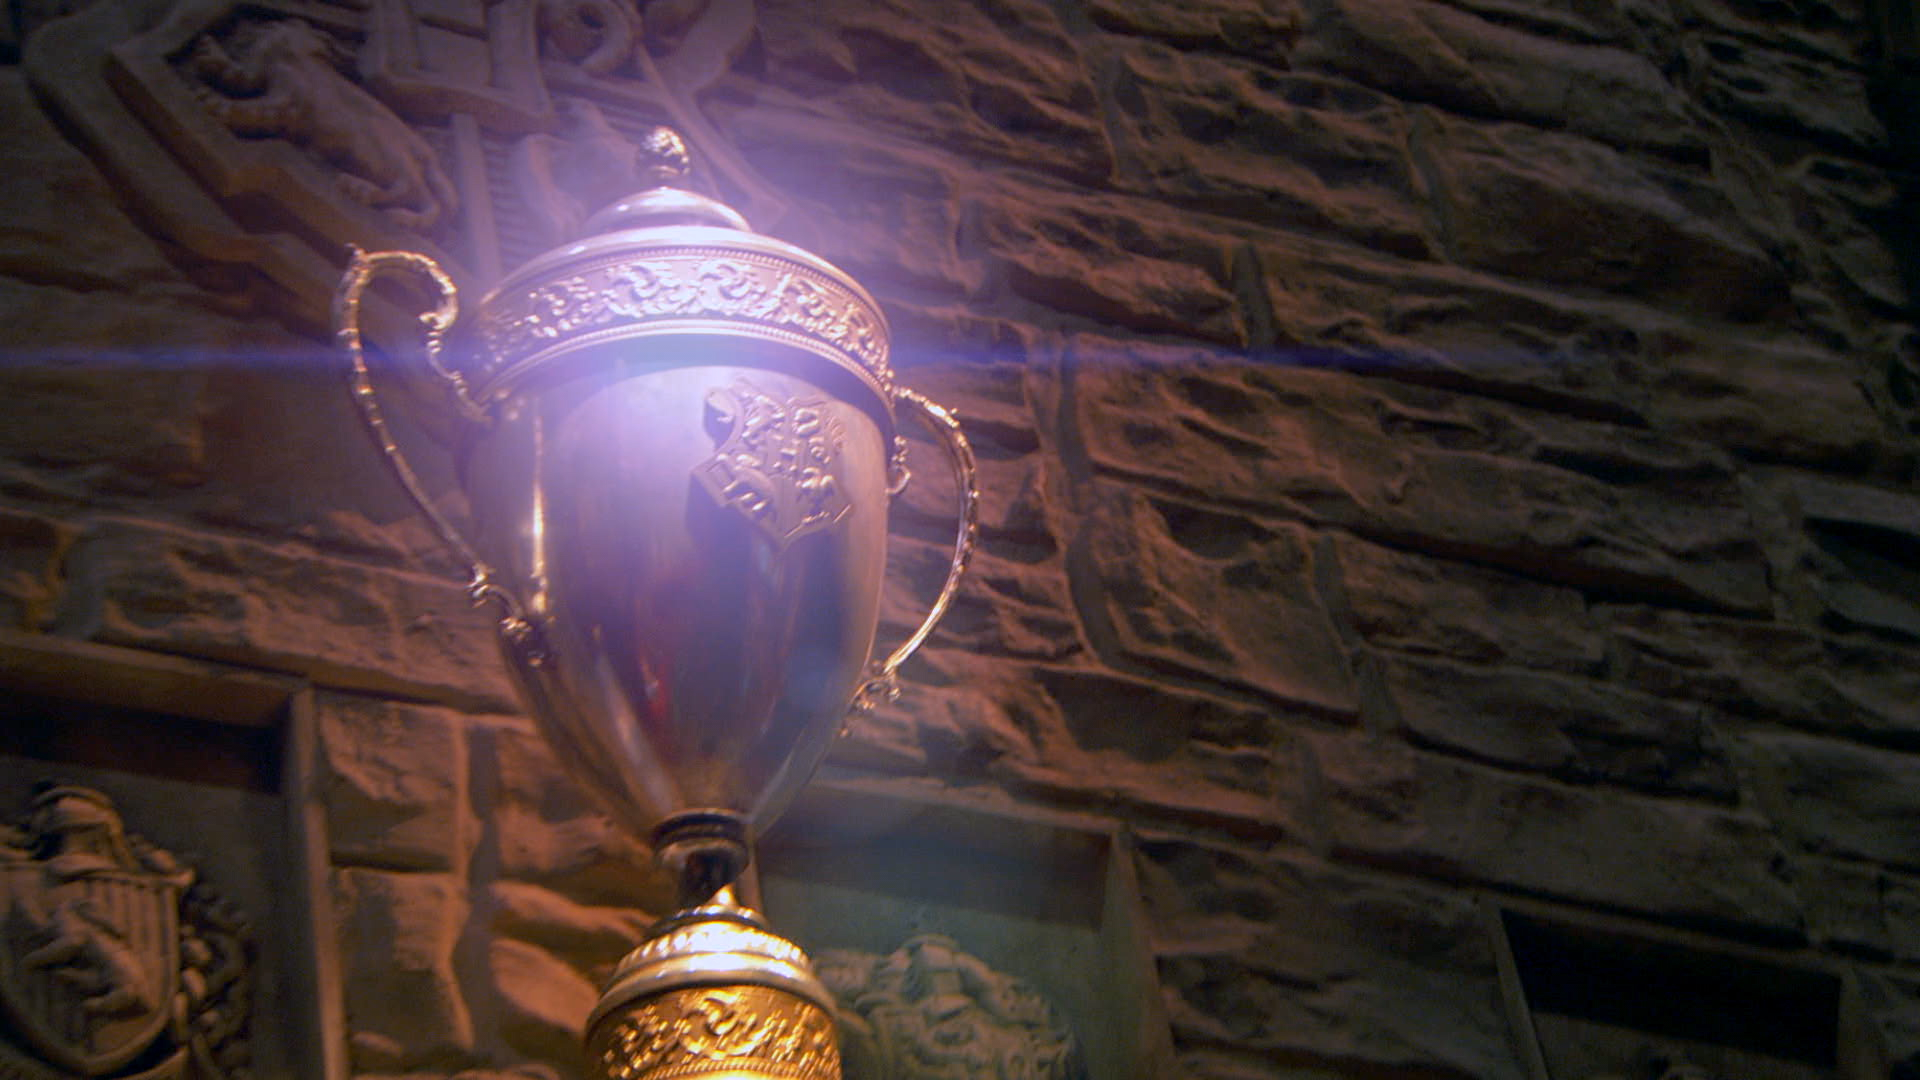 Harry Potter website Pottermore announces second Hogwarts House Cup given  in November 